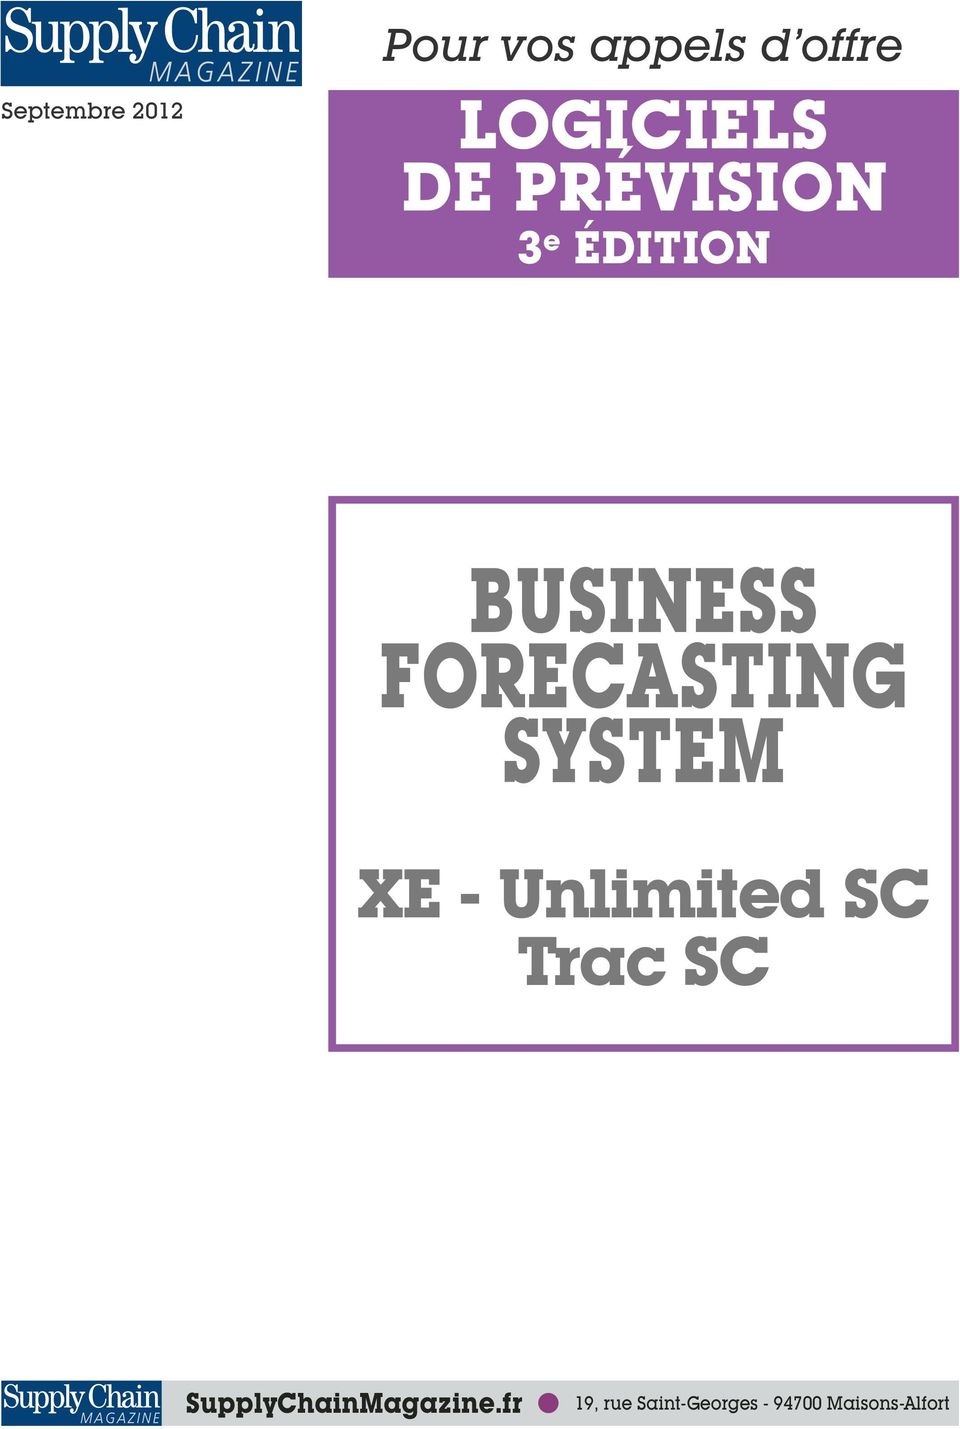 SYSTEM XE - Unlimited SC Trac SC